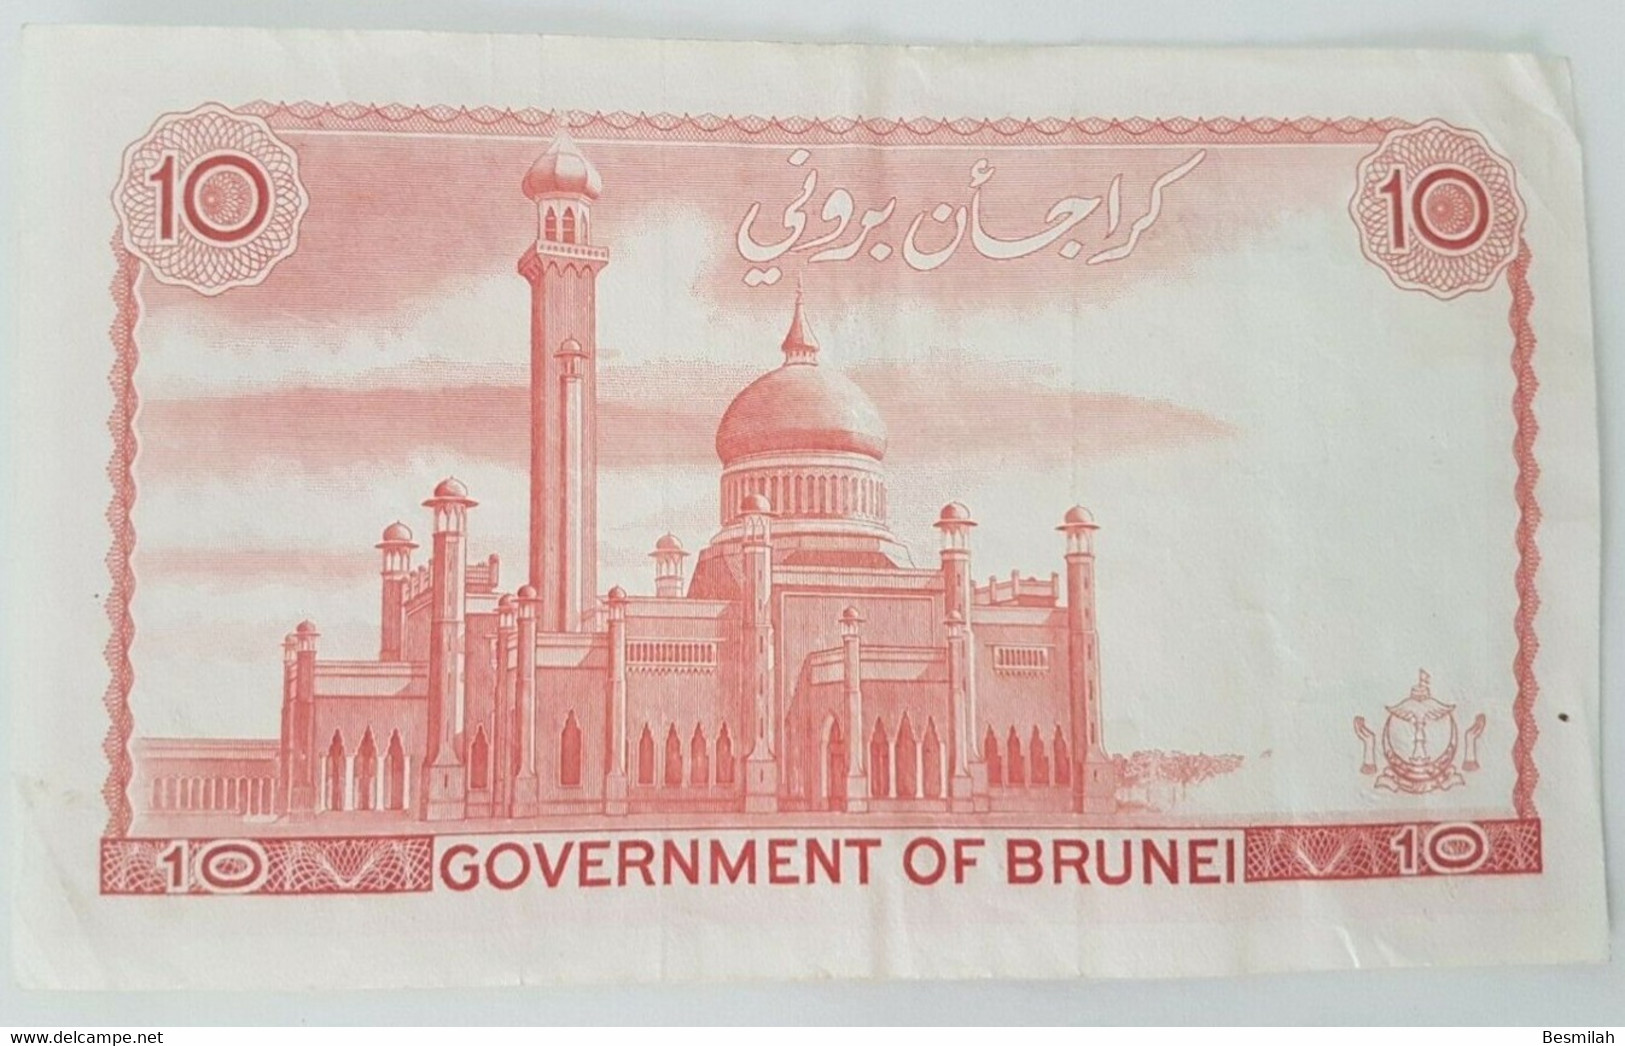 Brunei 10 Dollars (Ringgit) 1986 P-8 XF+ Condition, Look At The Picture - Brunei